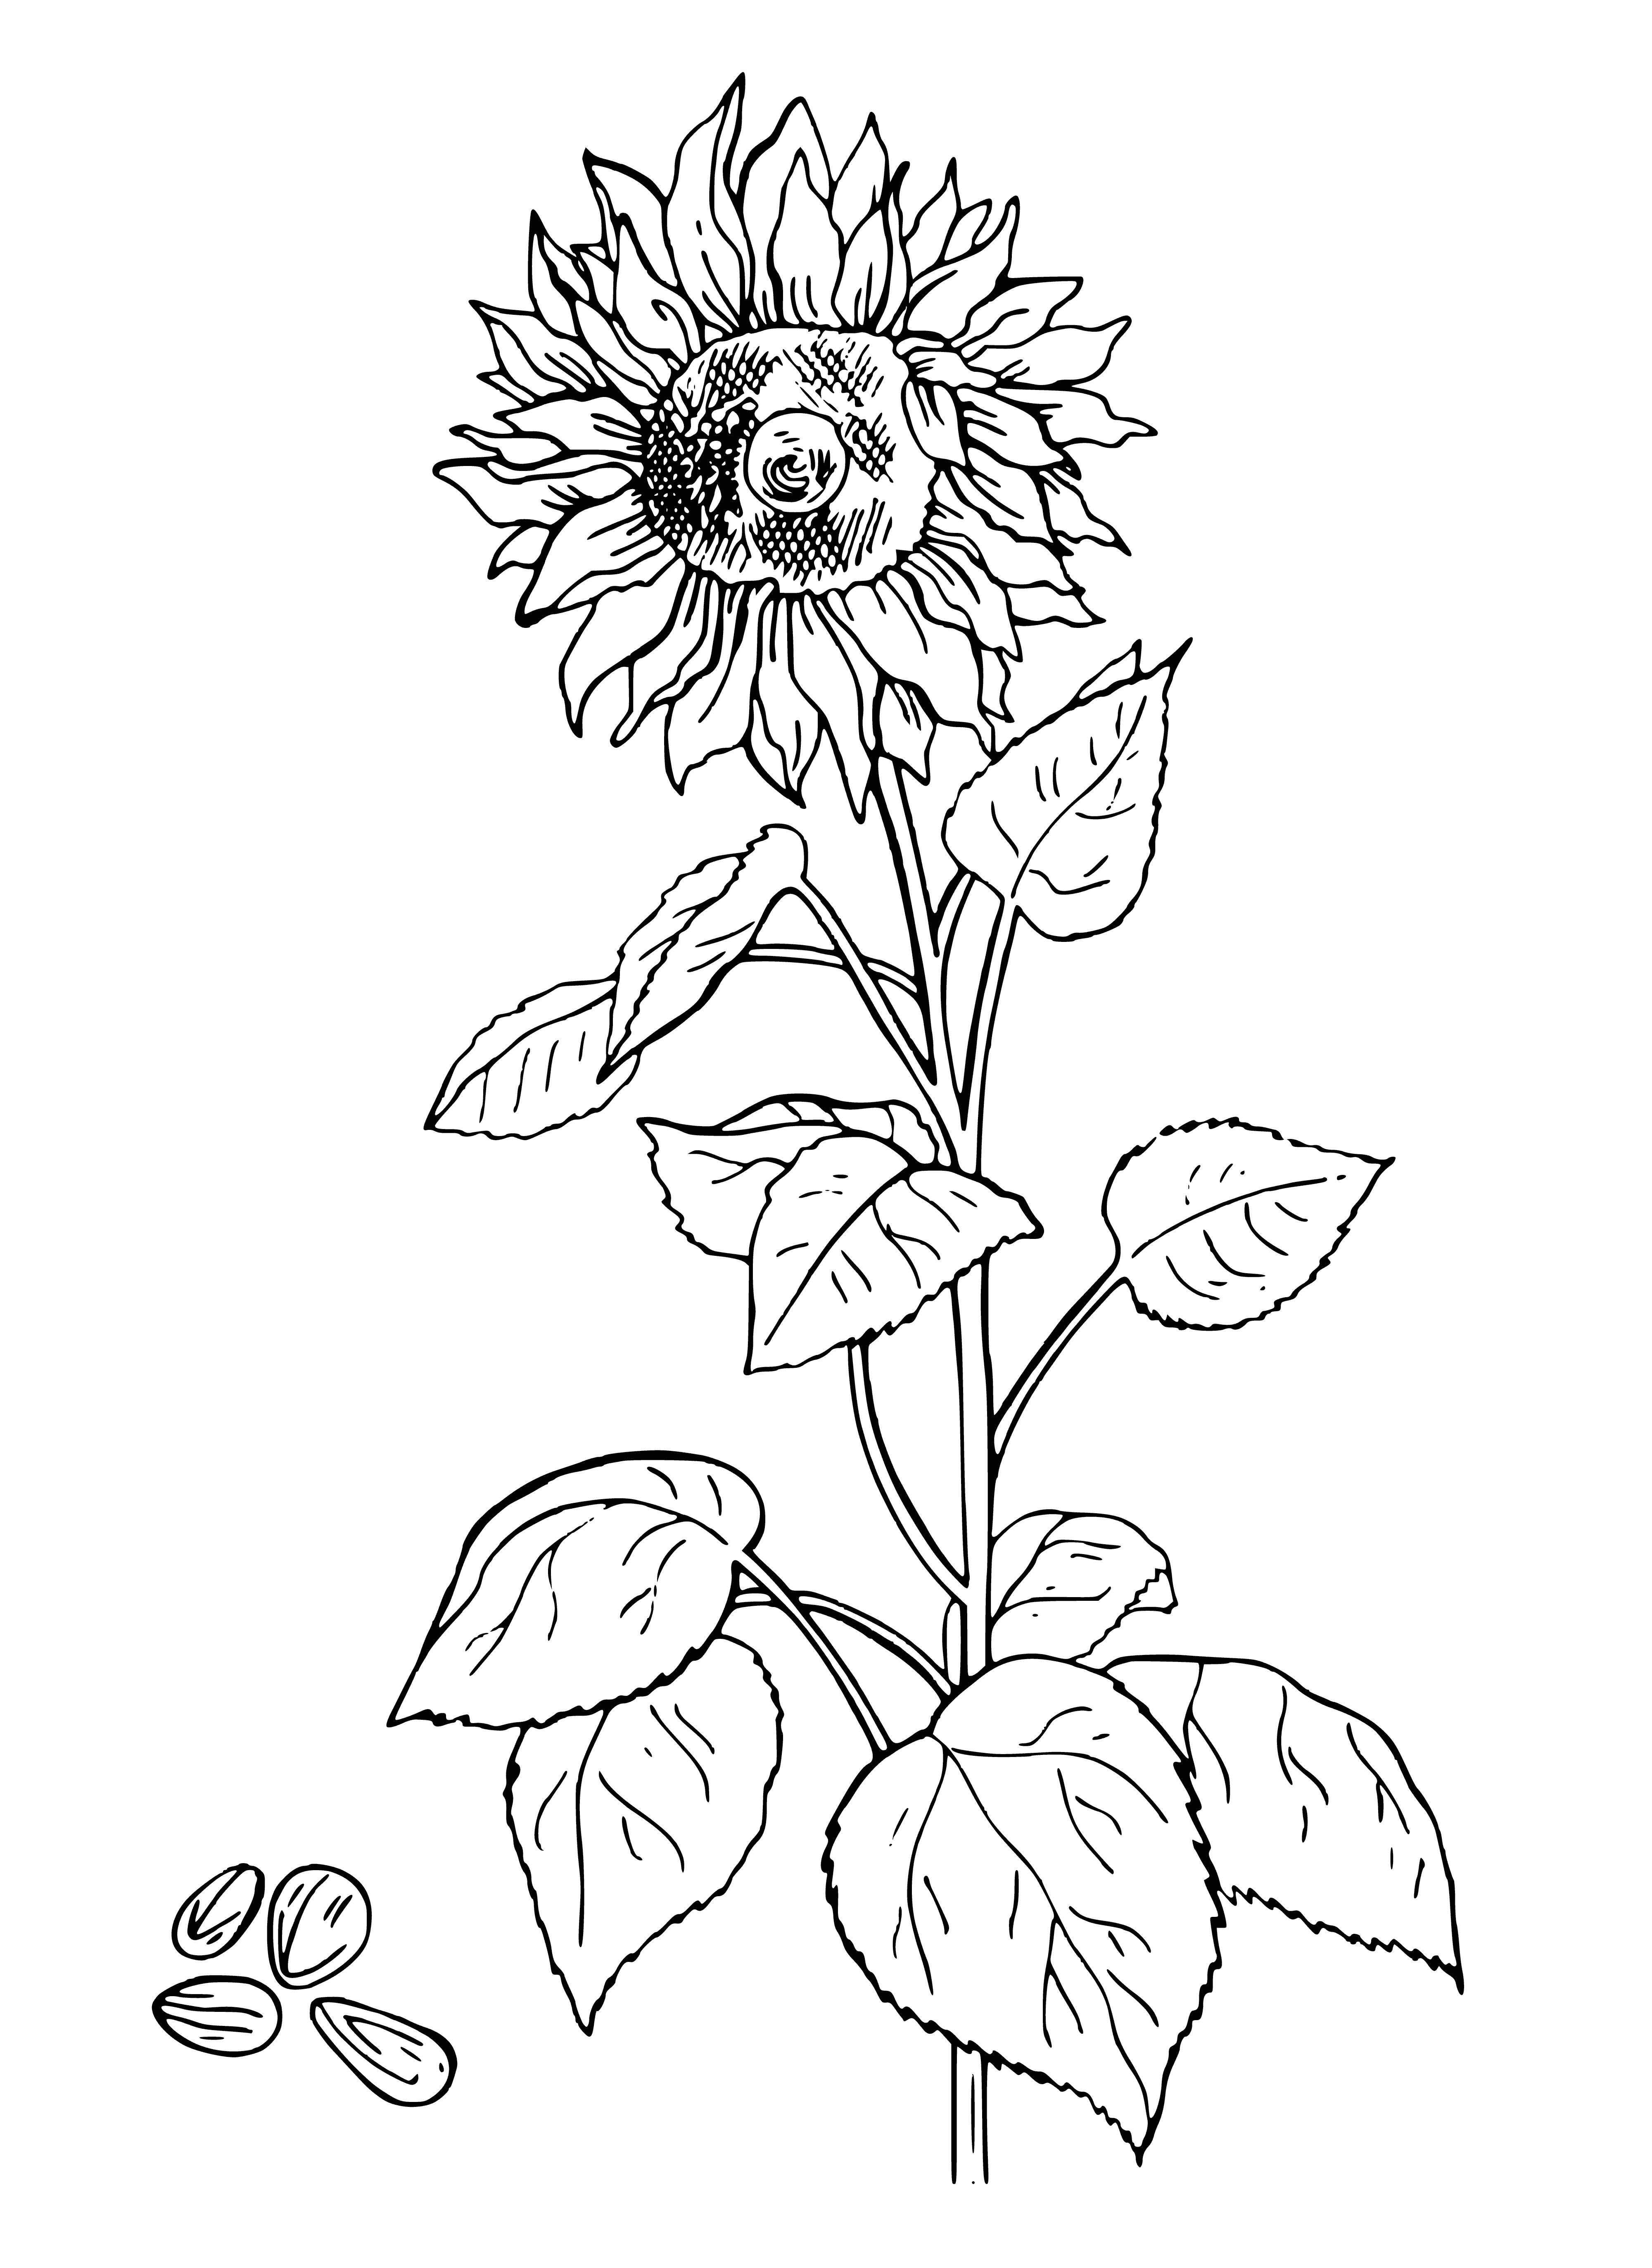 coloring page: Colorful sunflowers with green leaves, falling petals and thin stems—a beautiful sight! #coloring